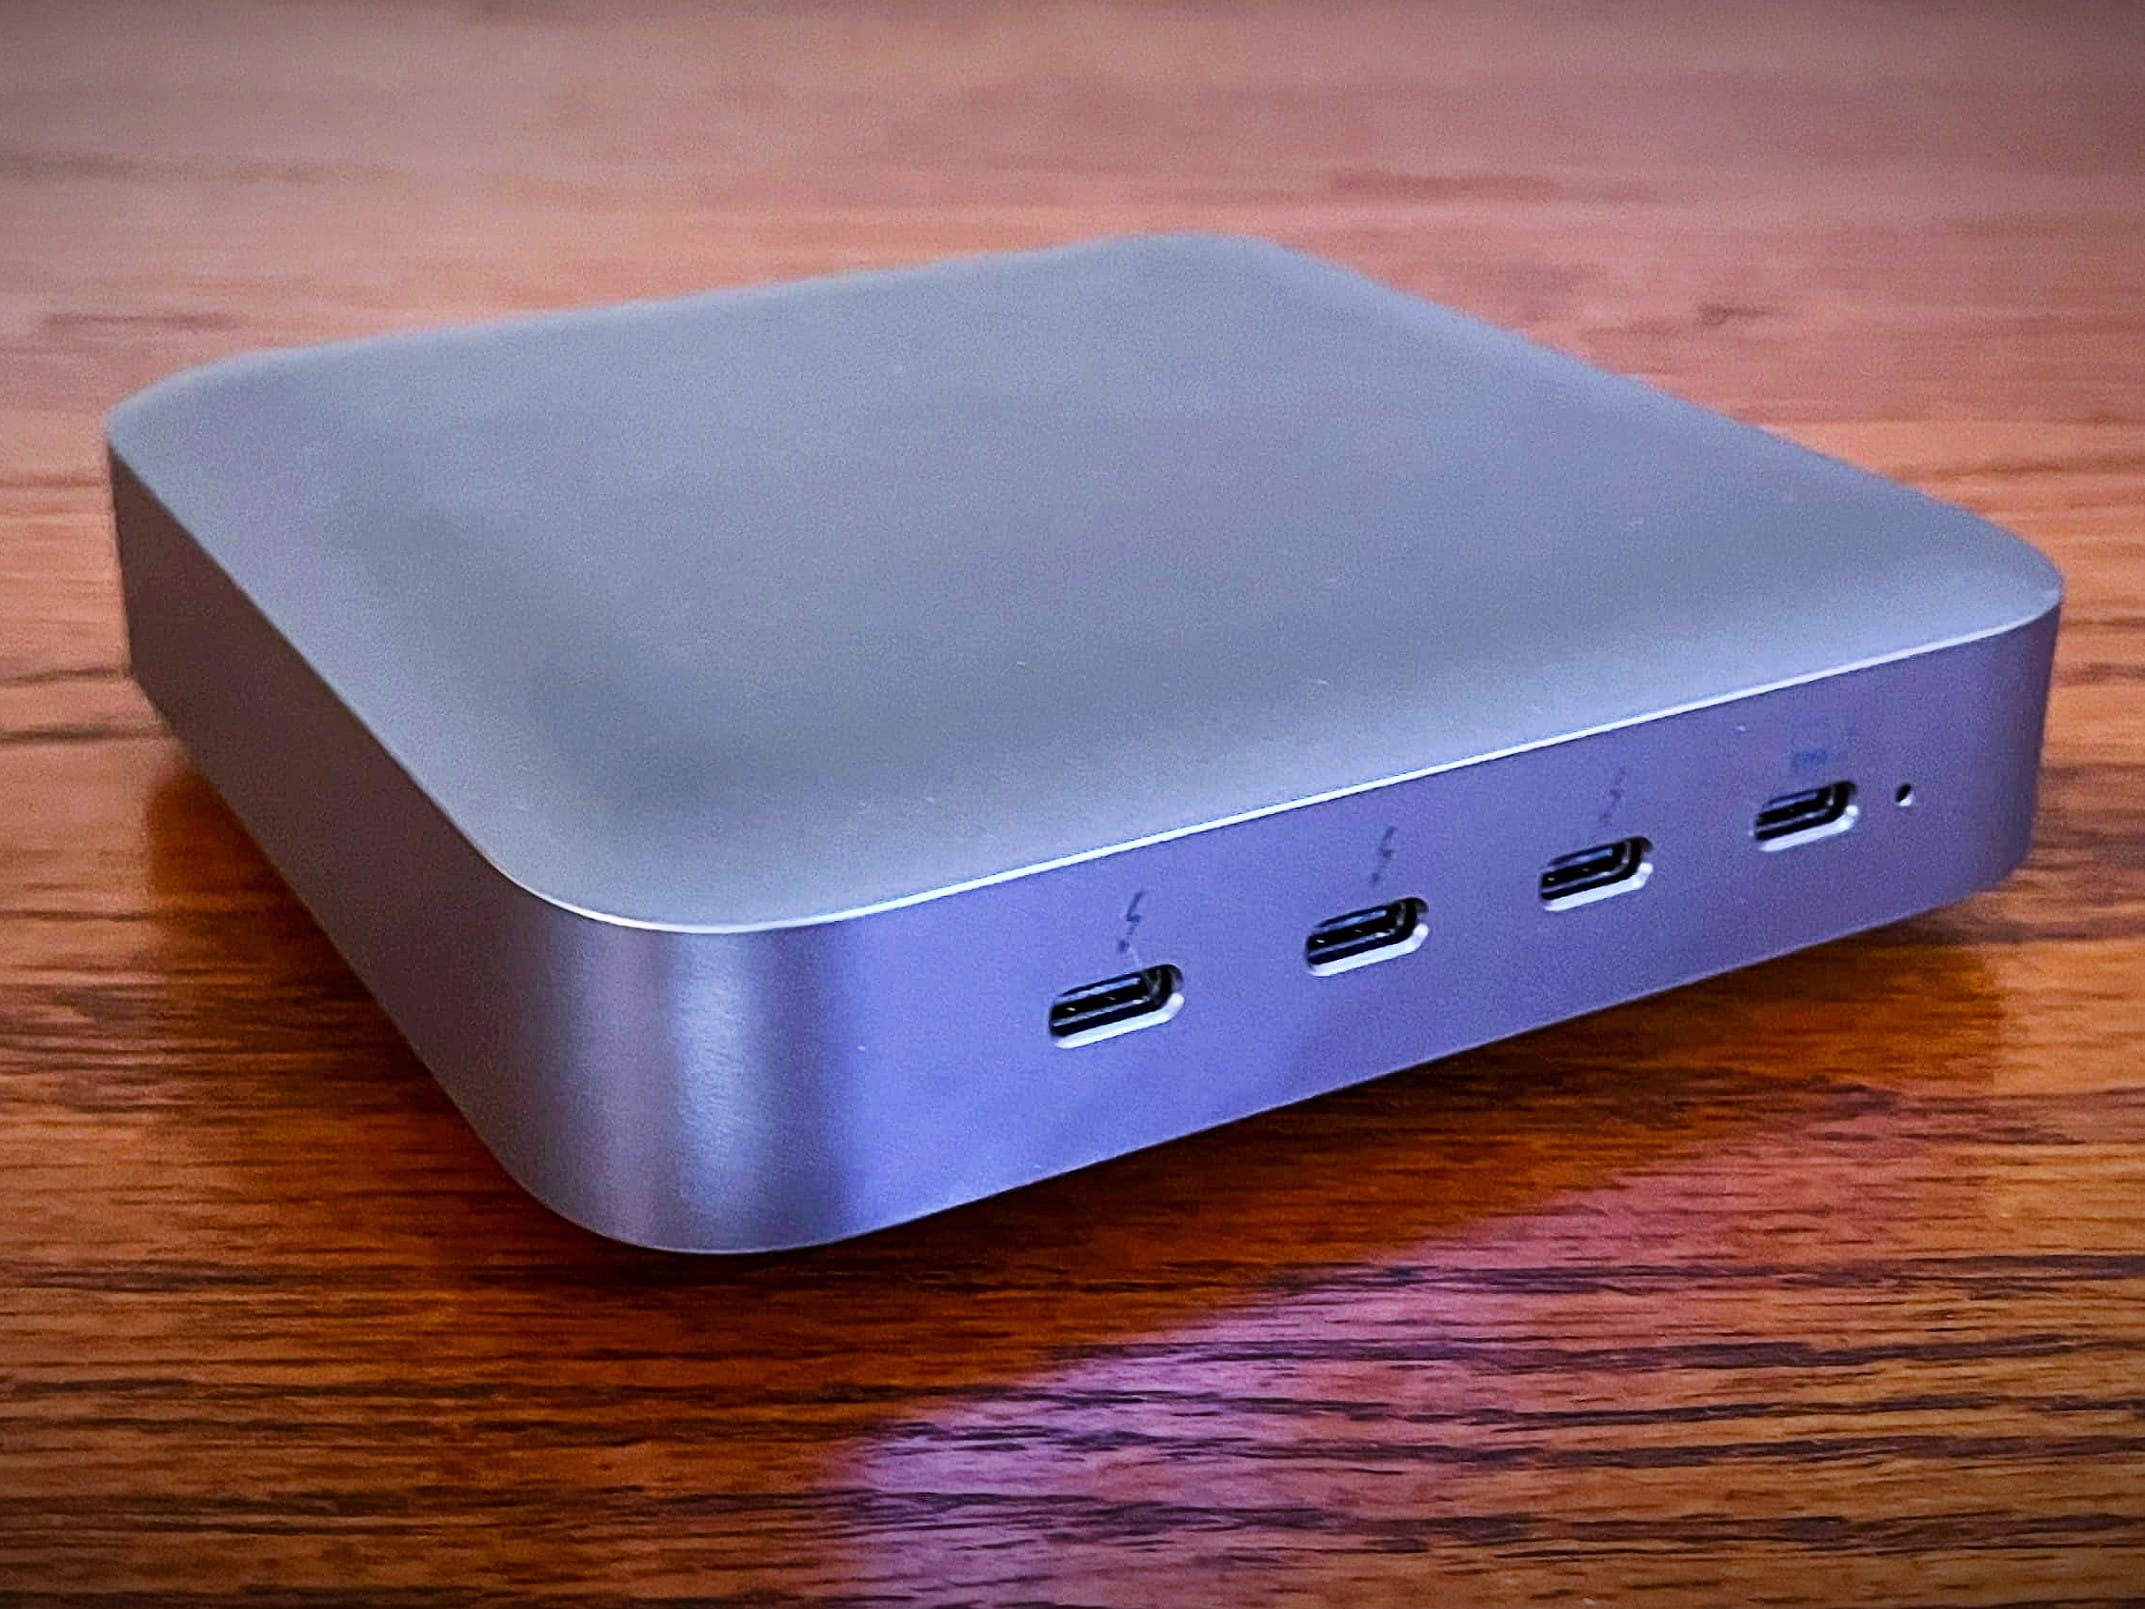 HyperDrive Thunderbolt 4 Power Hub review: Adds trio of high-speed